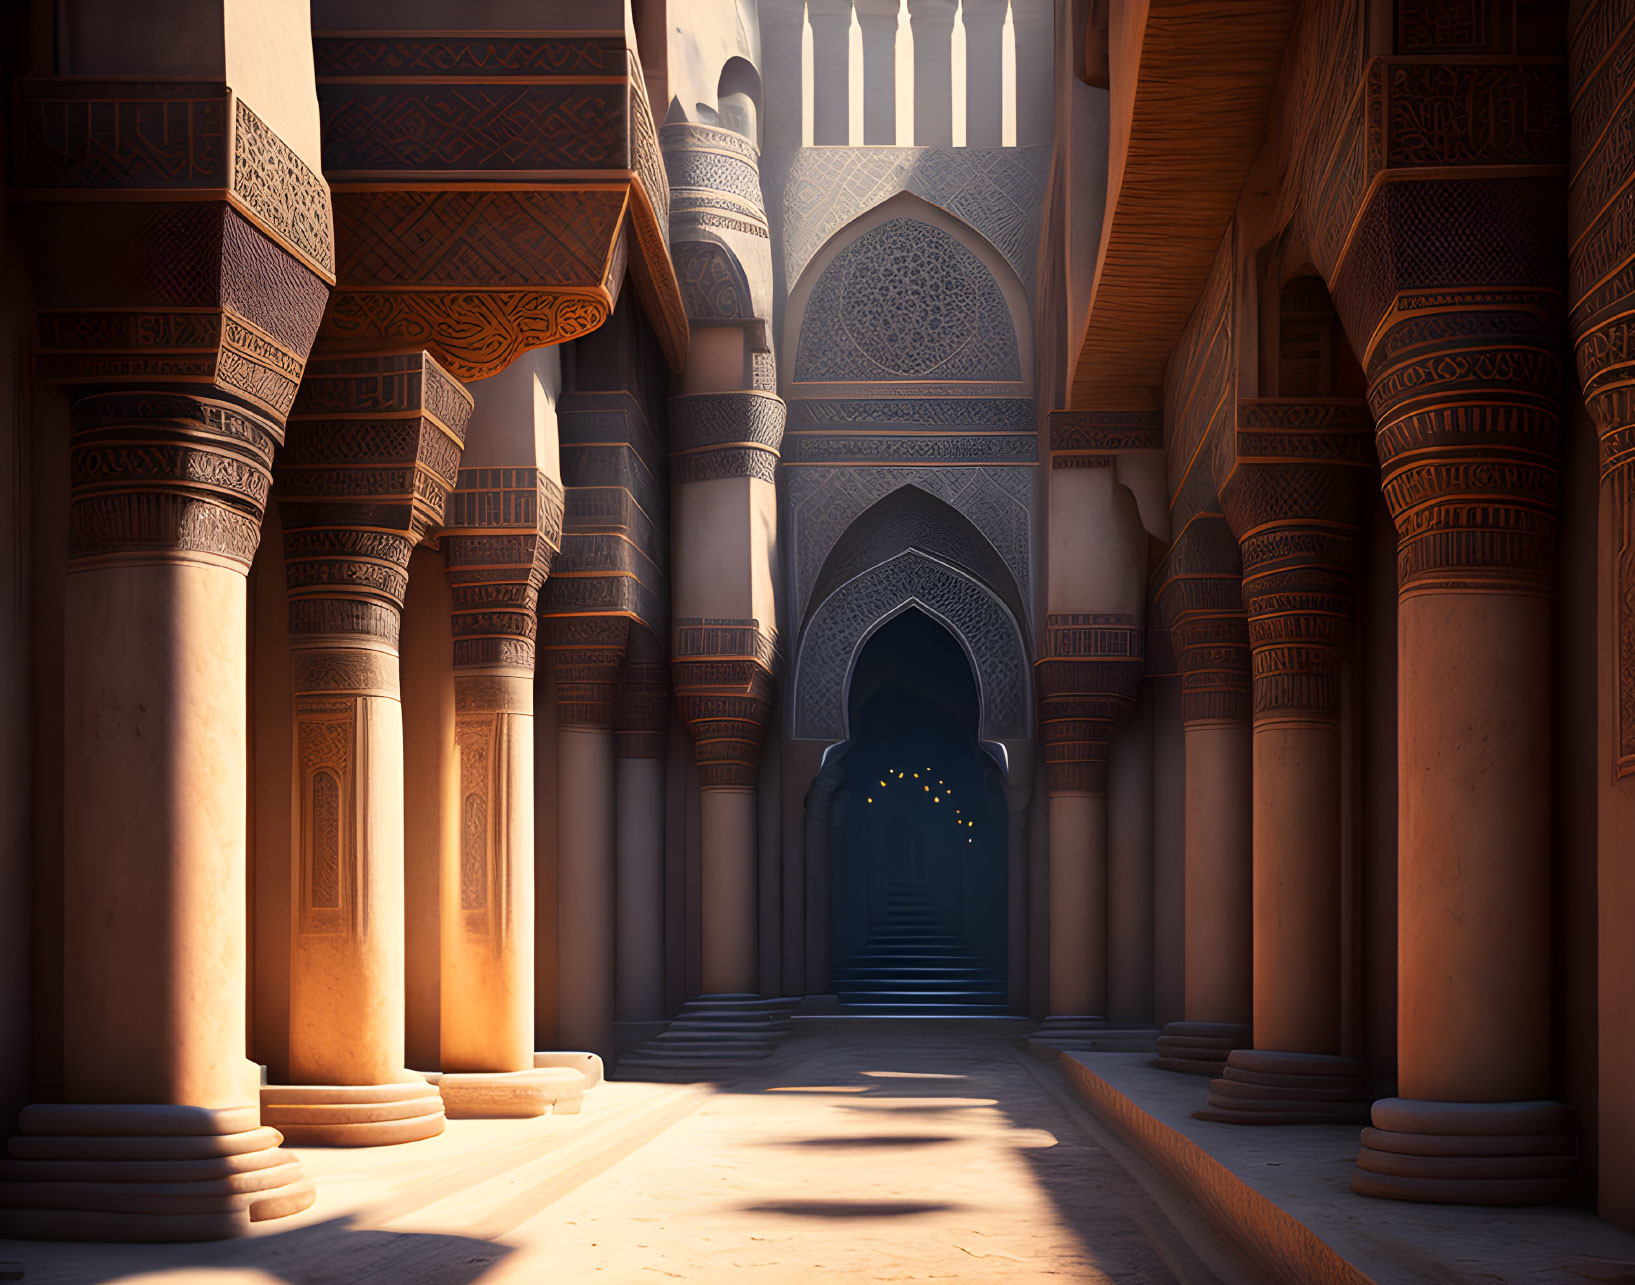 Ornate corridor with arches and intricate patterns in warm sunlight